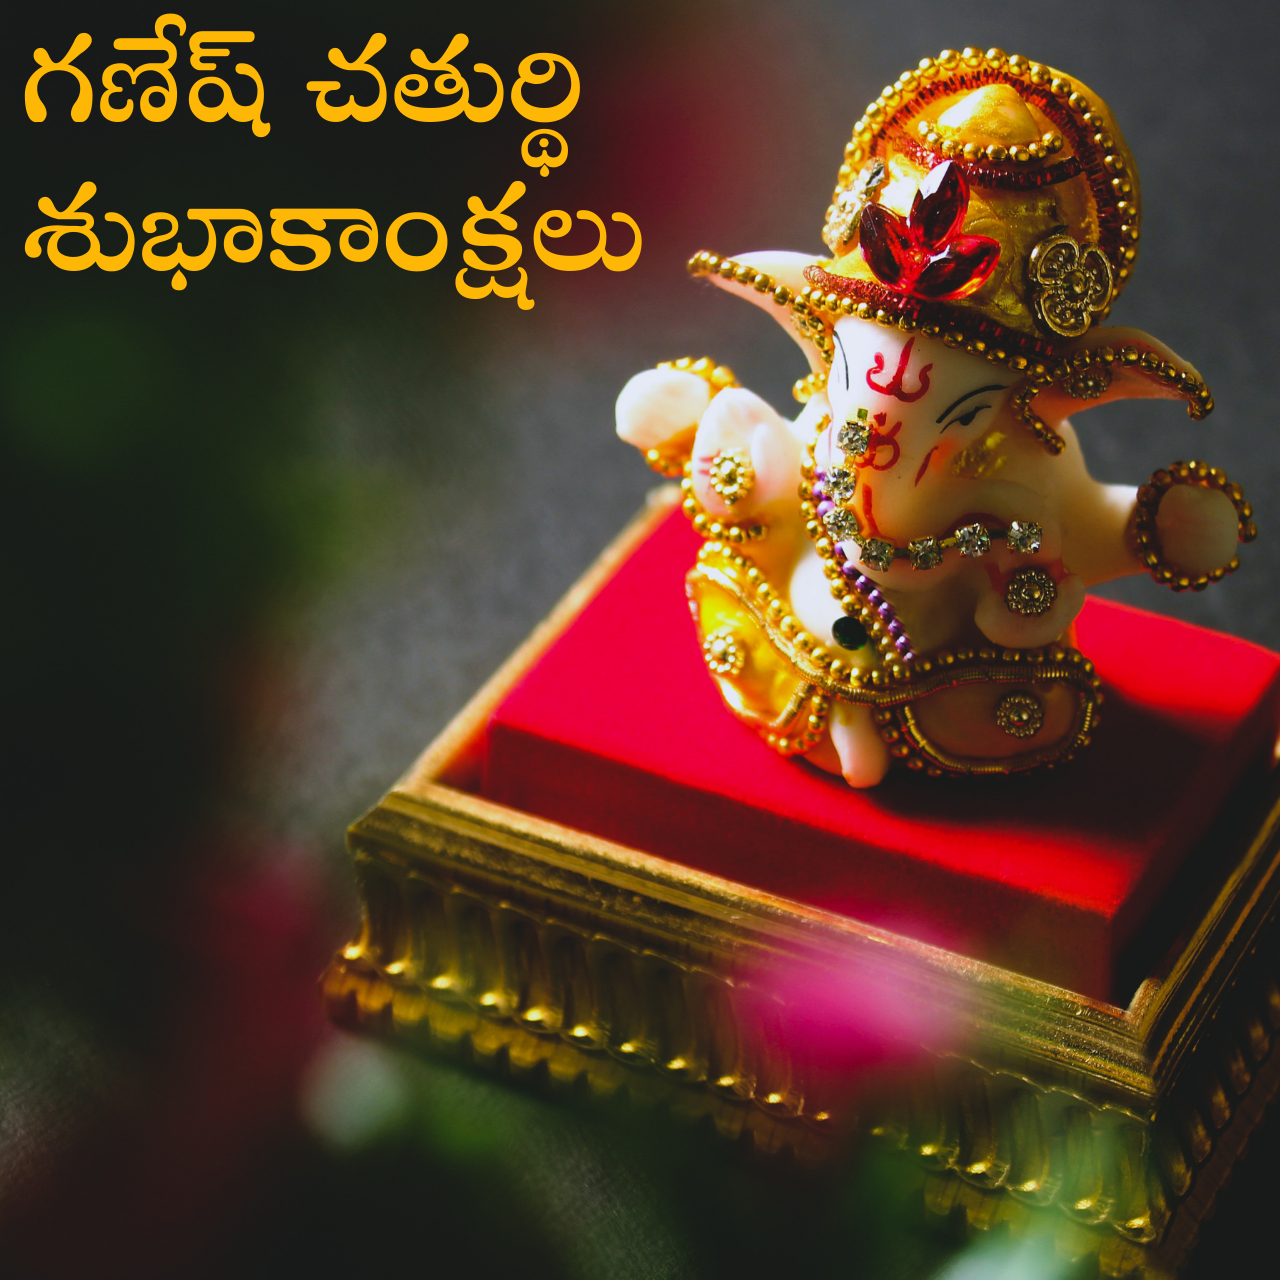 Ganesh Chaturthi 2021 Telugu Wishes Quotes Hd Images Messages Greetings And Status To Share 8540